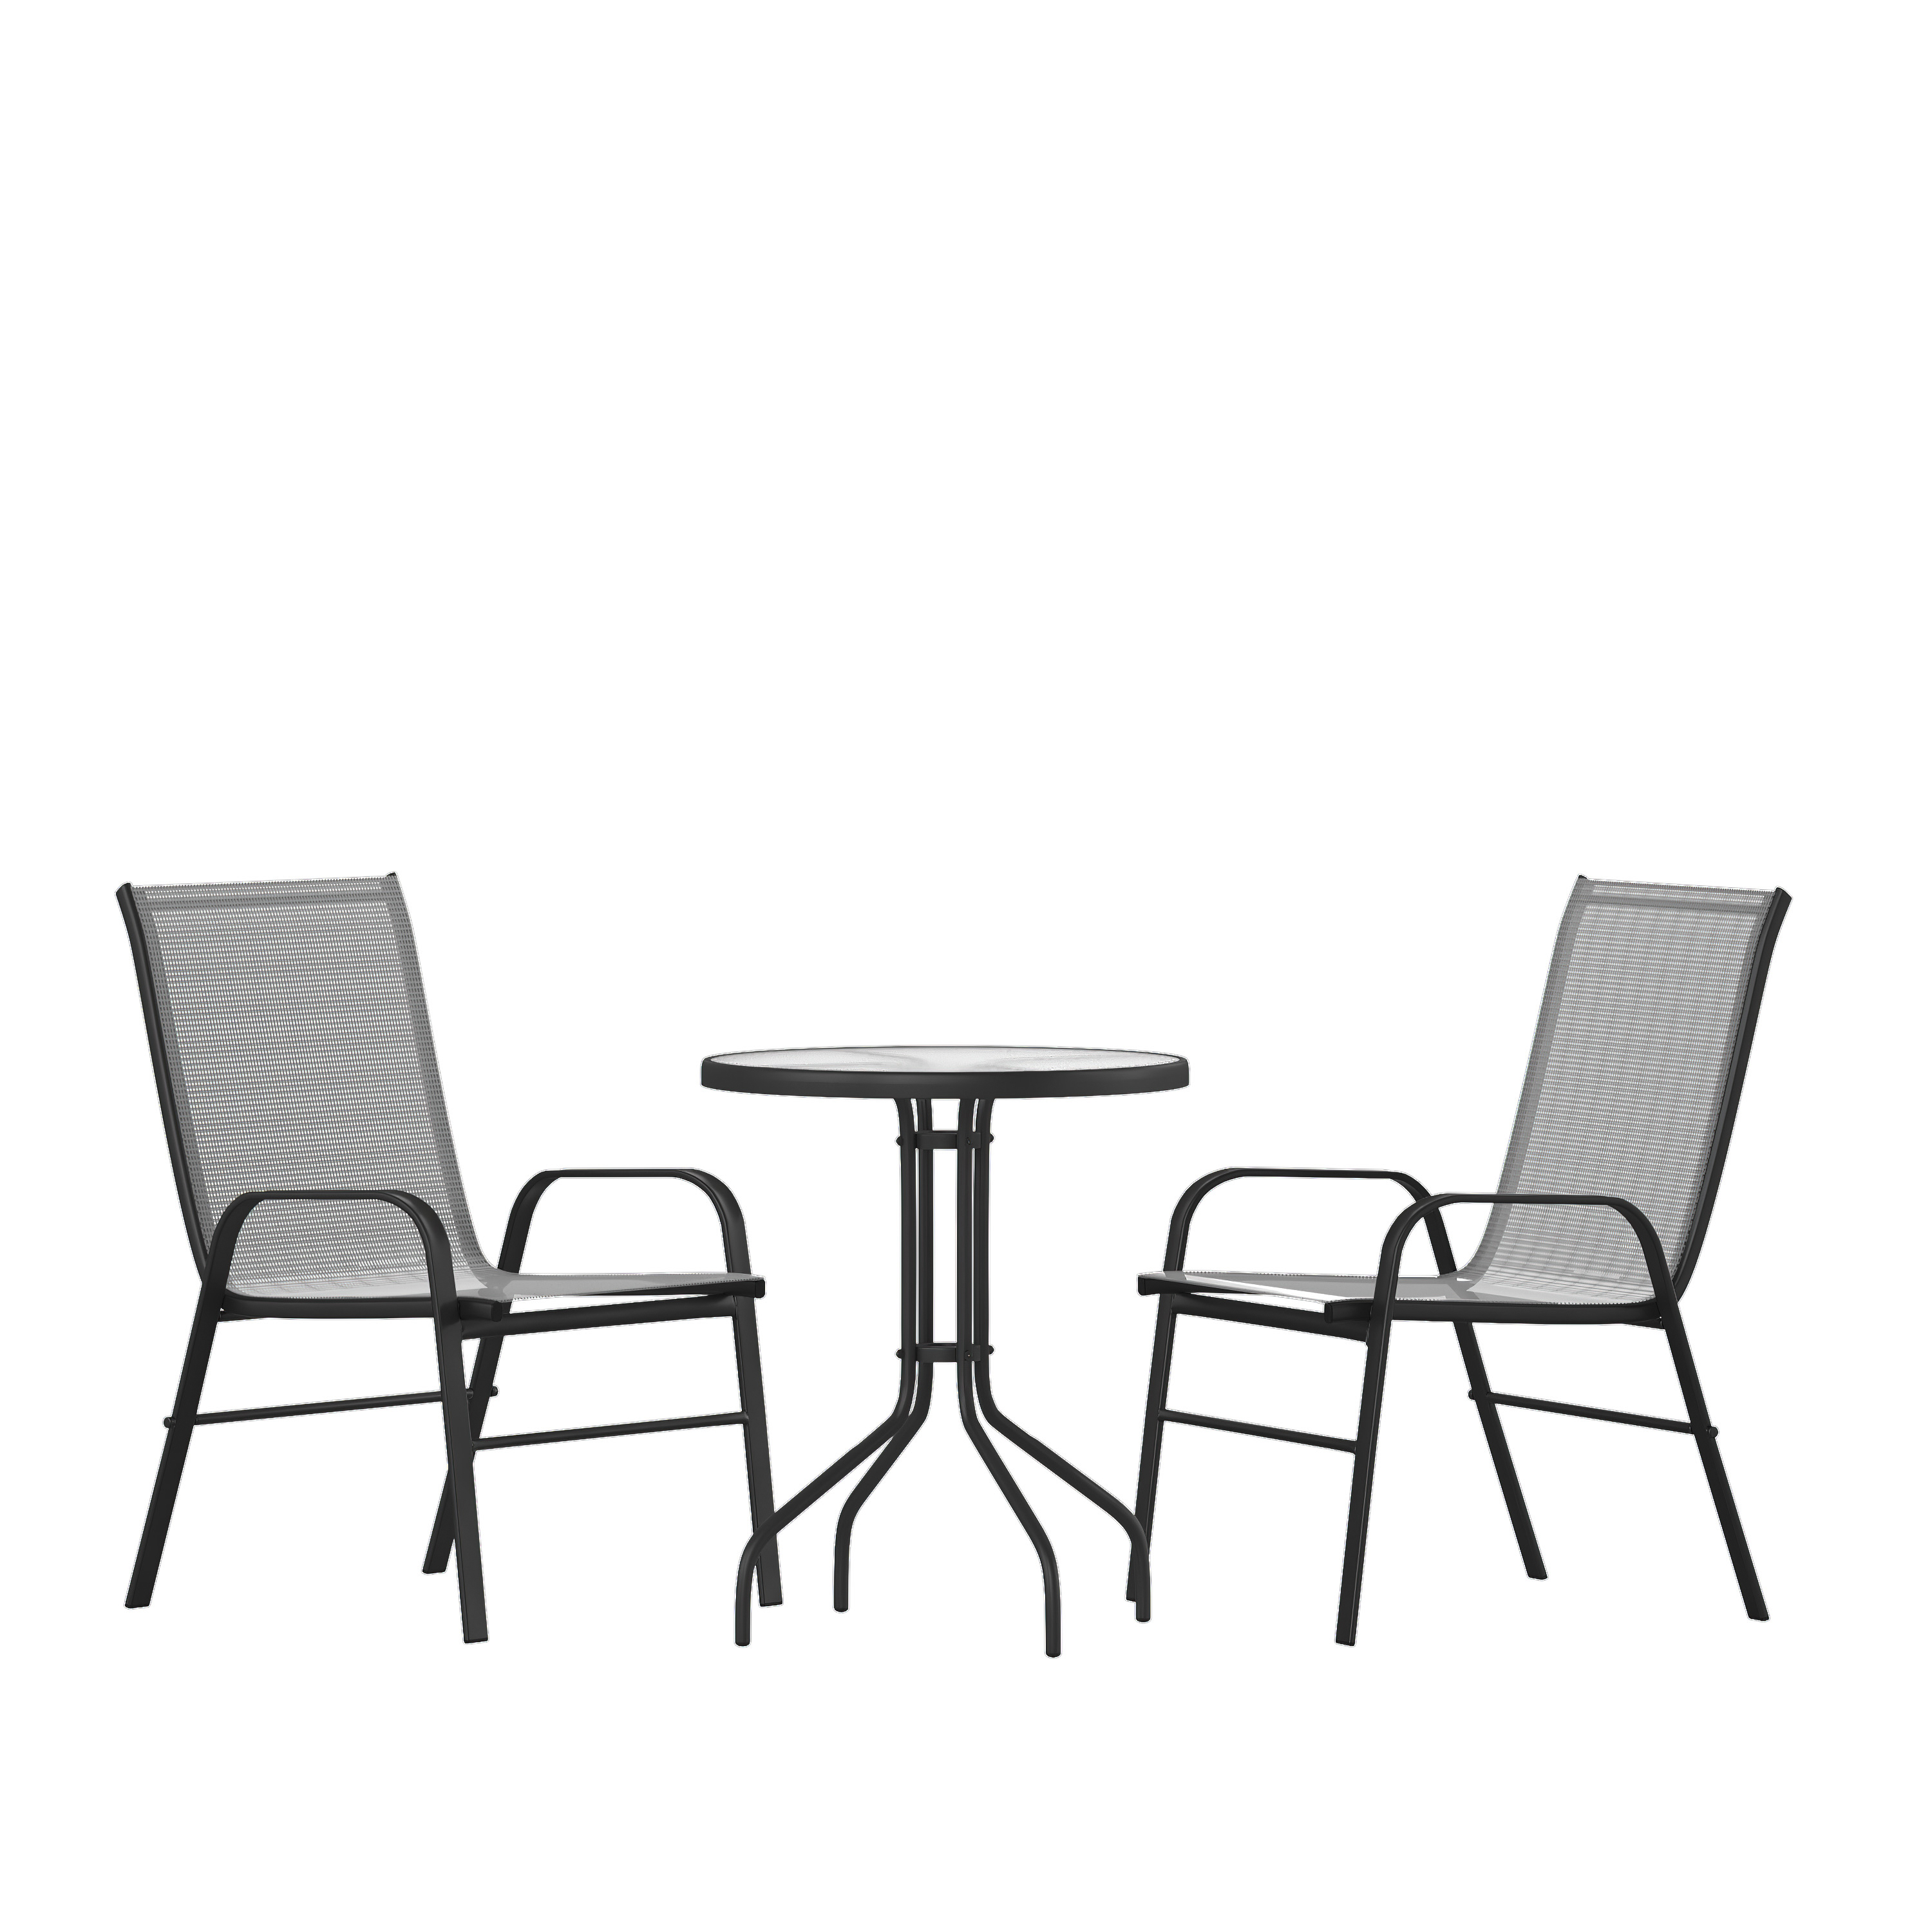 Flash Furniture TLH-0701303C-GY-GG 3.75" Round Tempered Glass Patio Table, 2 Gray Flex Comfort Stack Chairs, 3 Piece Set